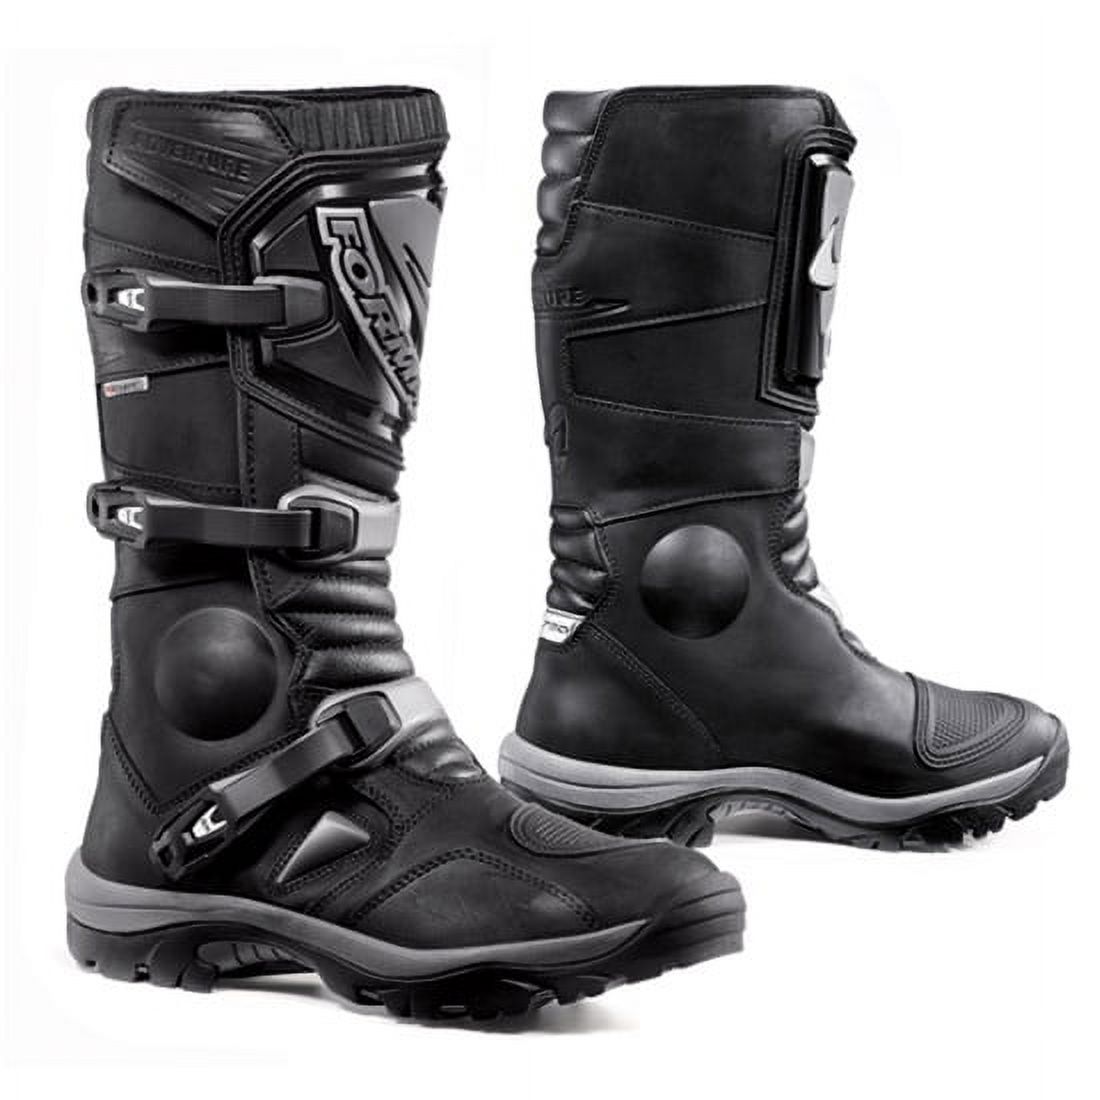 Forma Adventure Touring Motorcycle Riding Boots - Black - FOADVBK - image 1 of 1